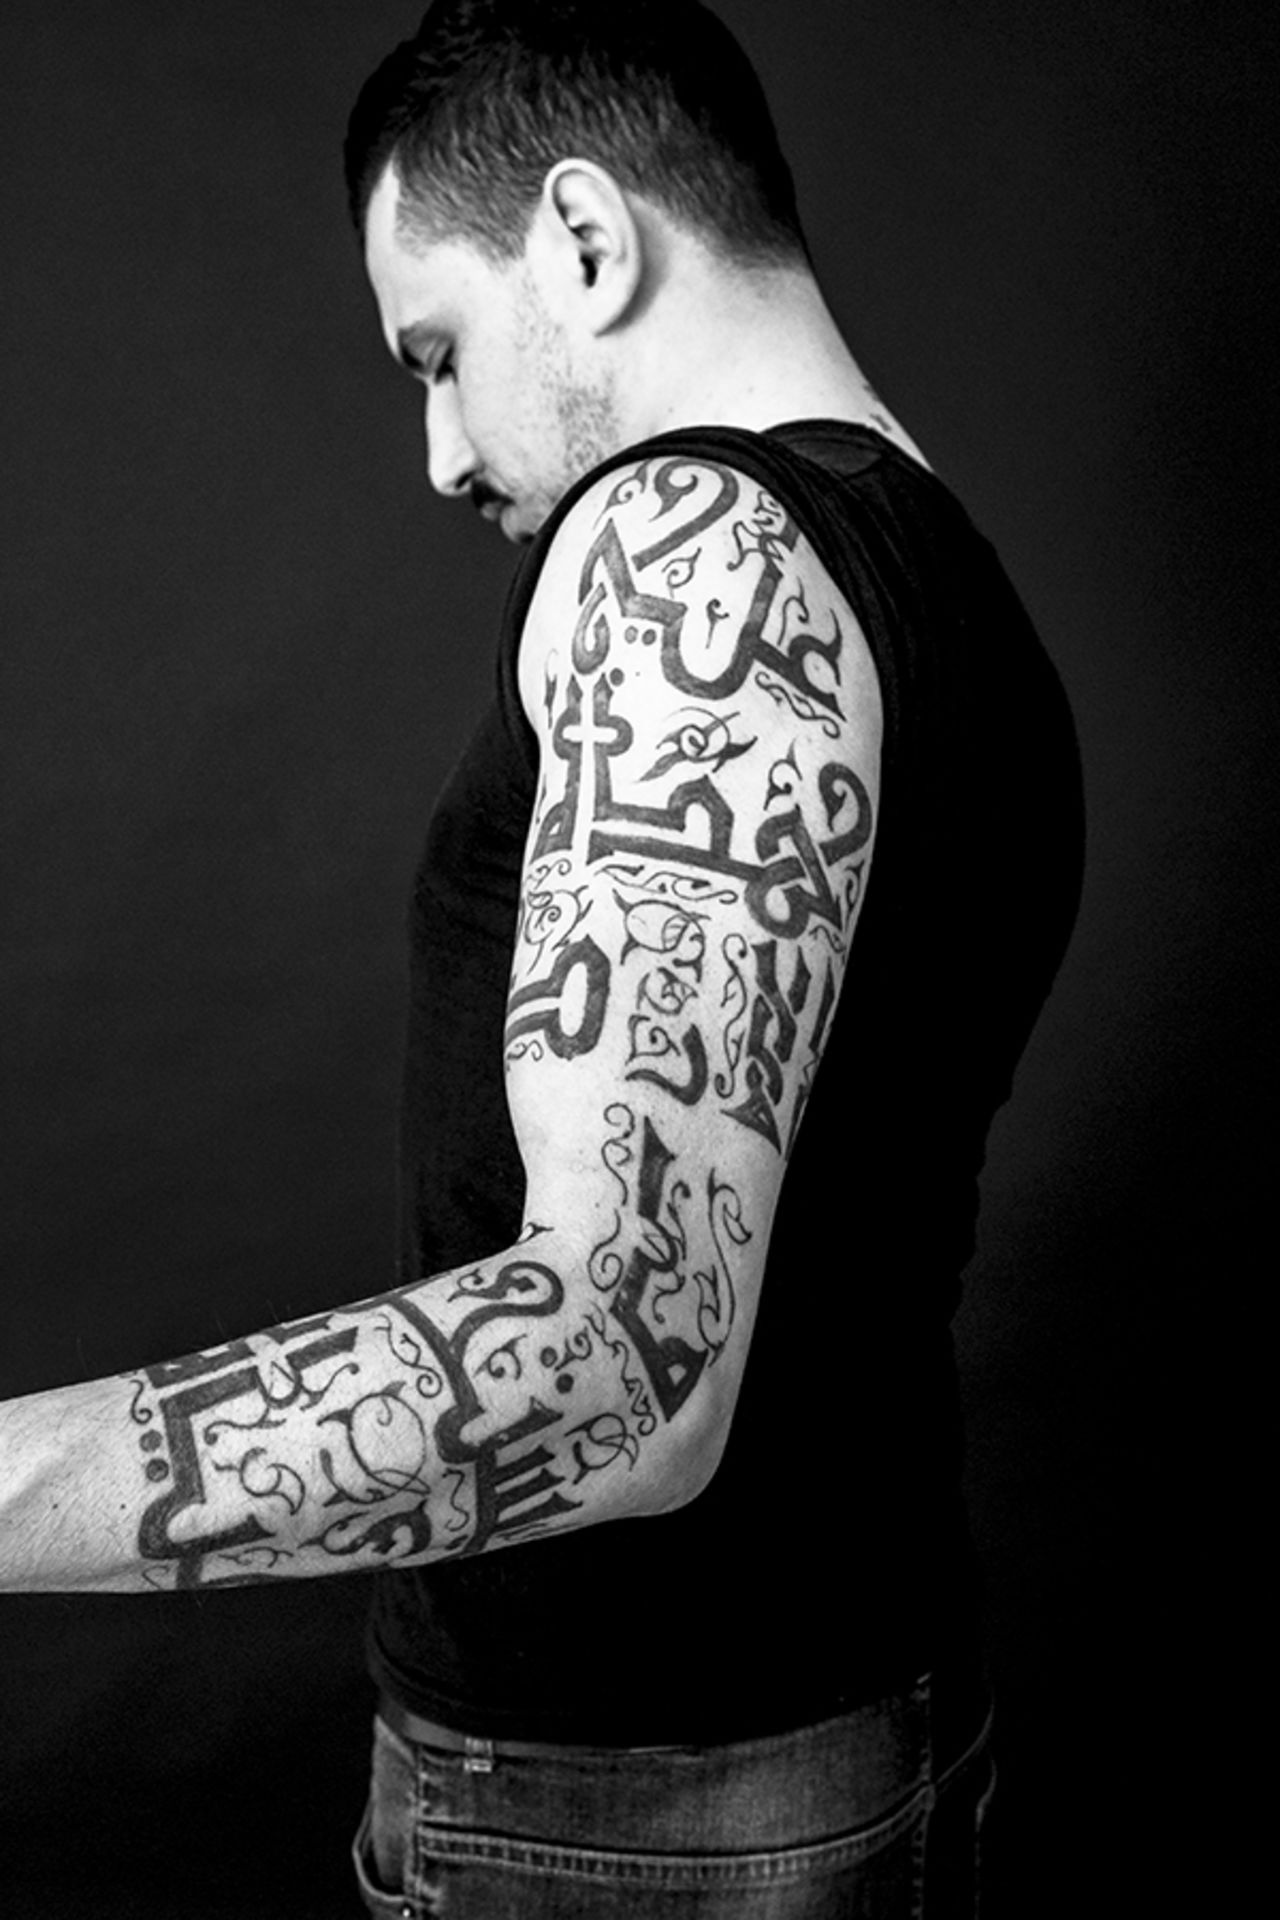 Akram Al Deek's tattoo is a line of poetry by Mahmoud Darwish "On this earth what's worth living for."